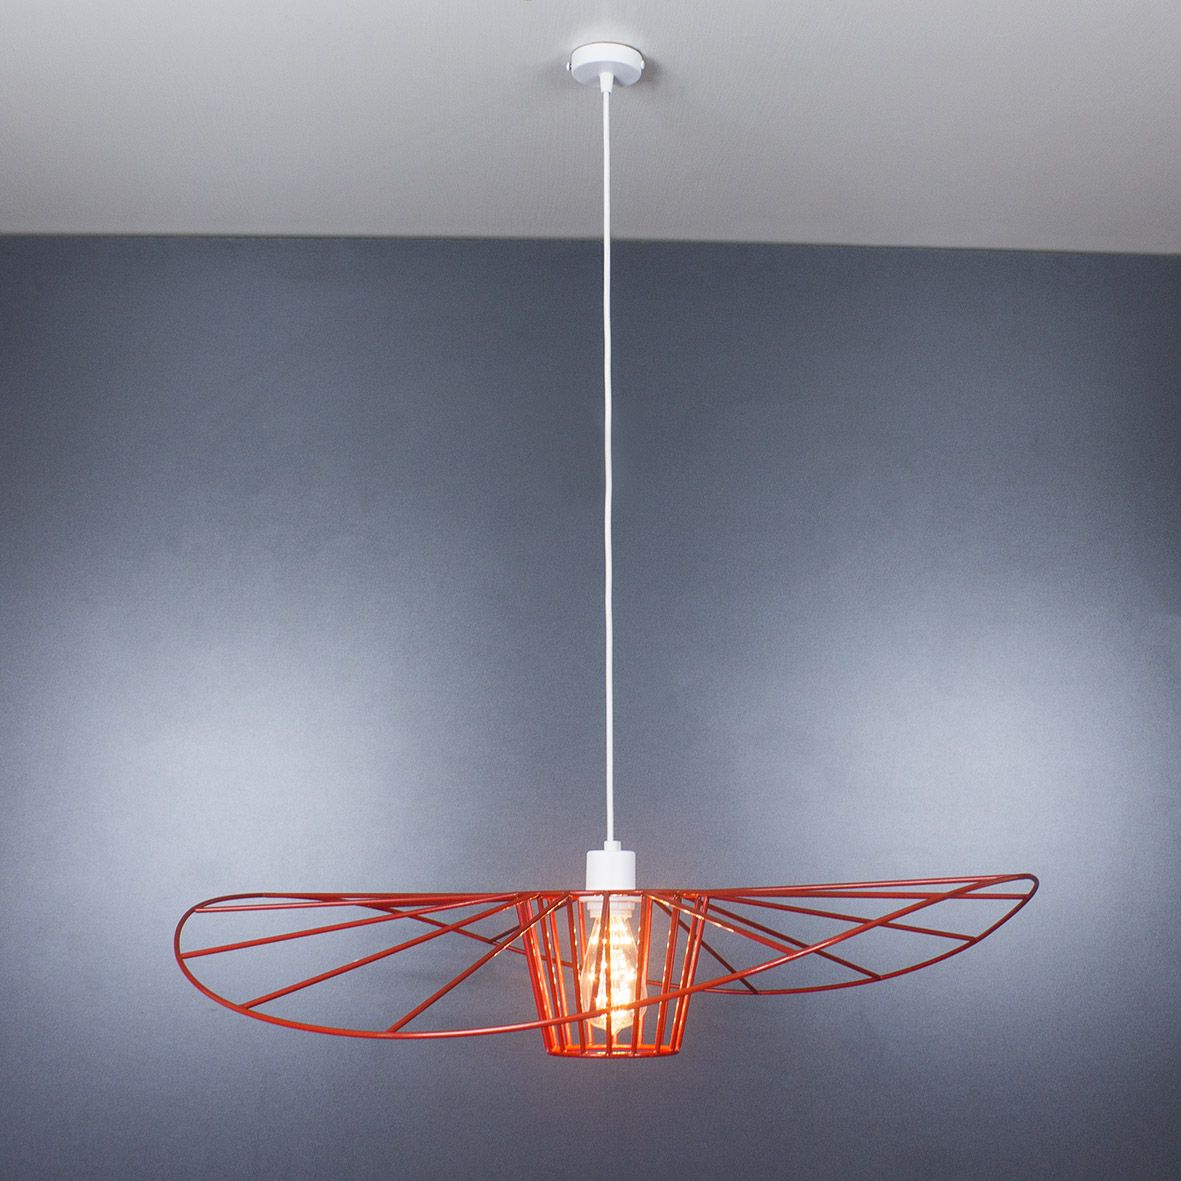 Suspension lamp Lady red / white